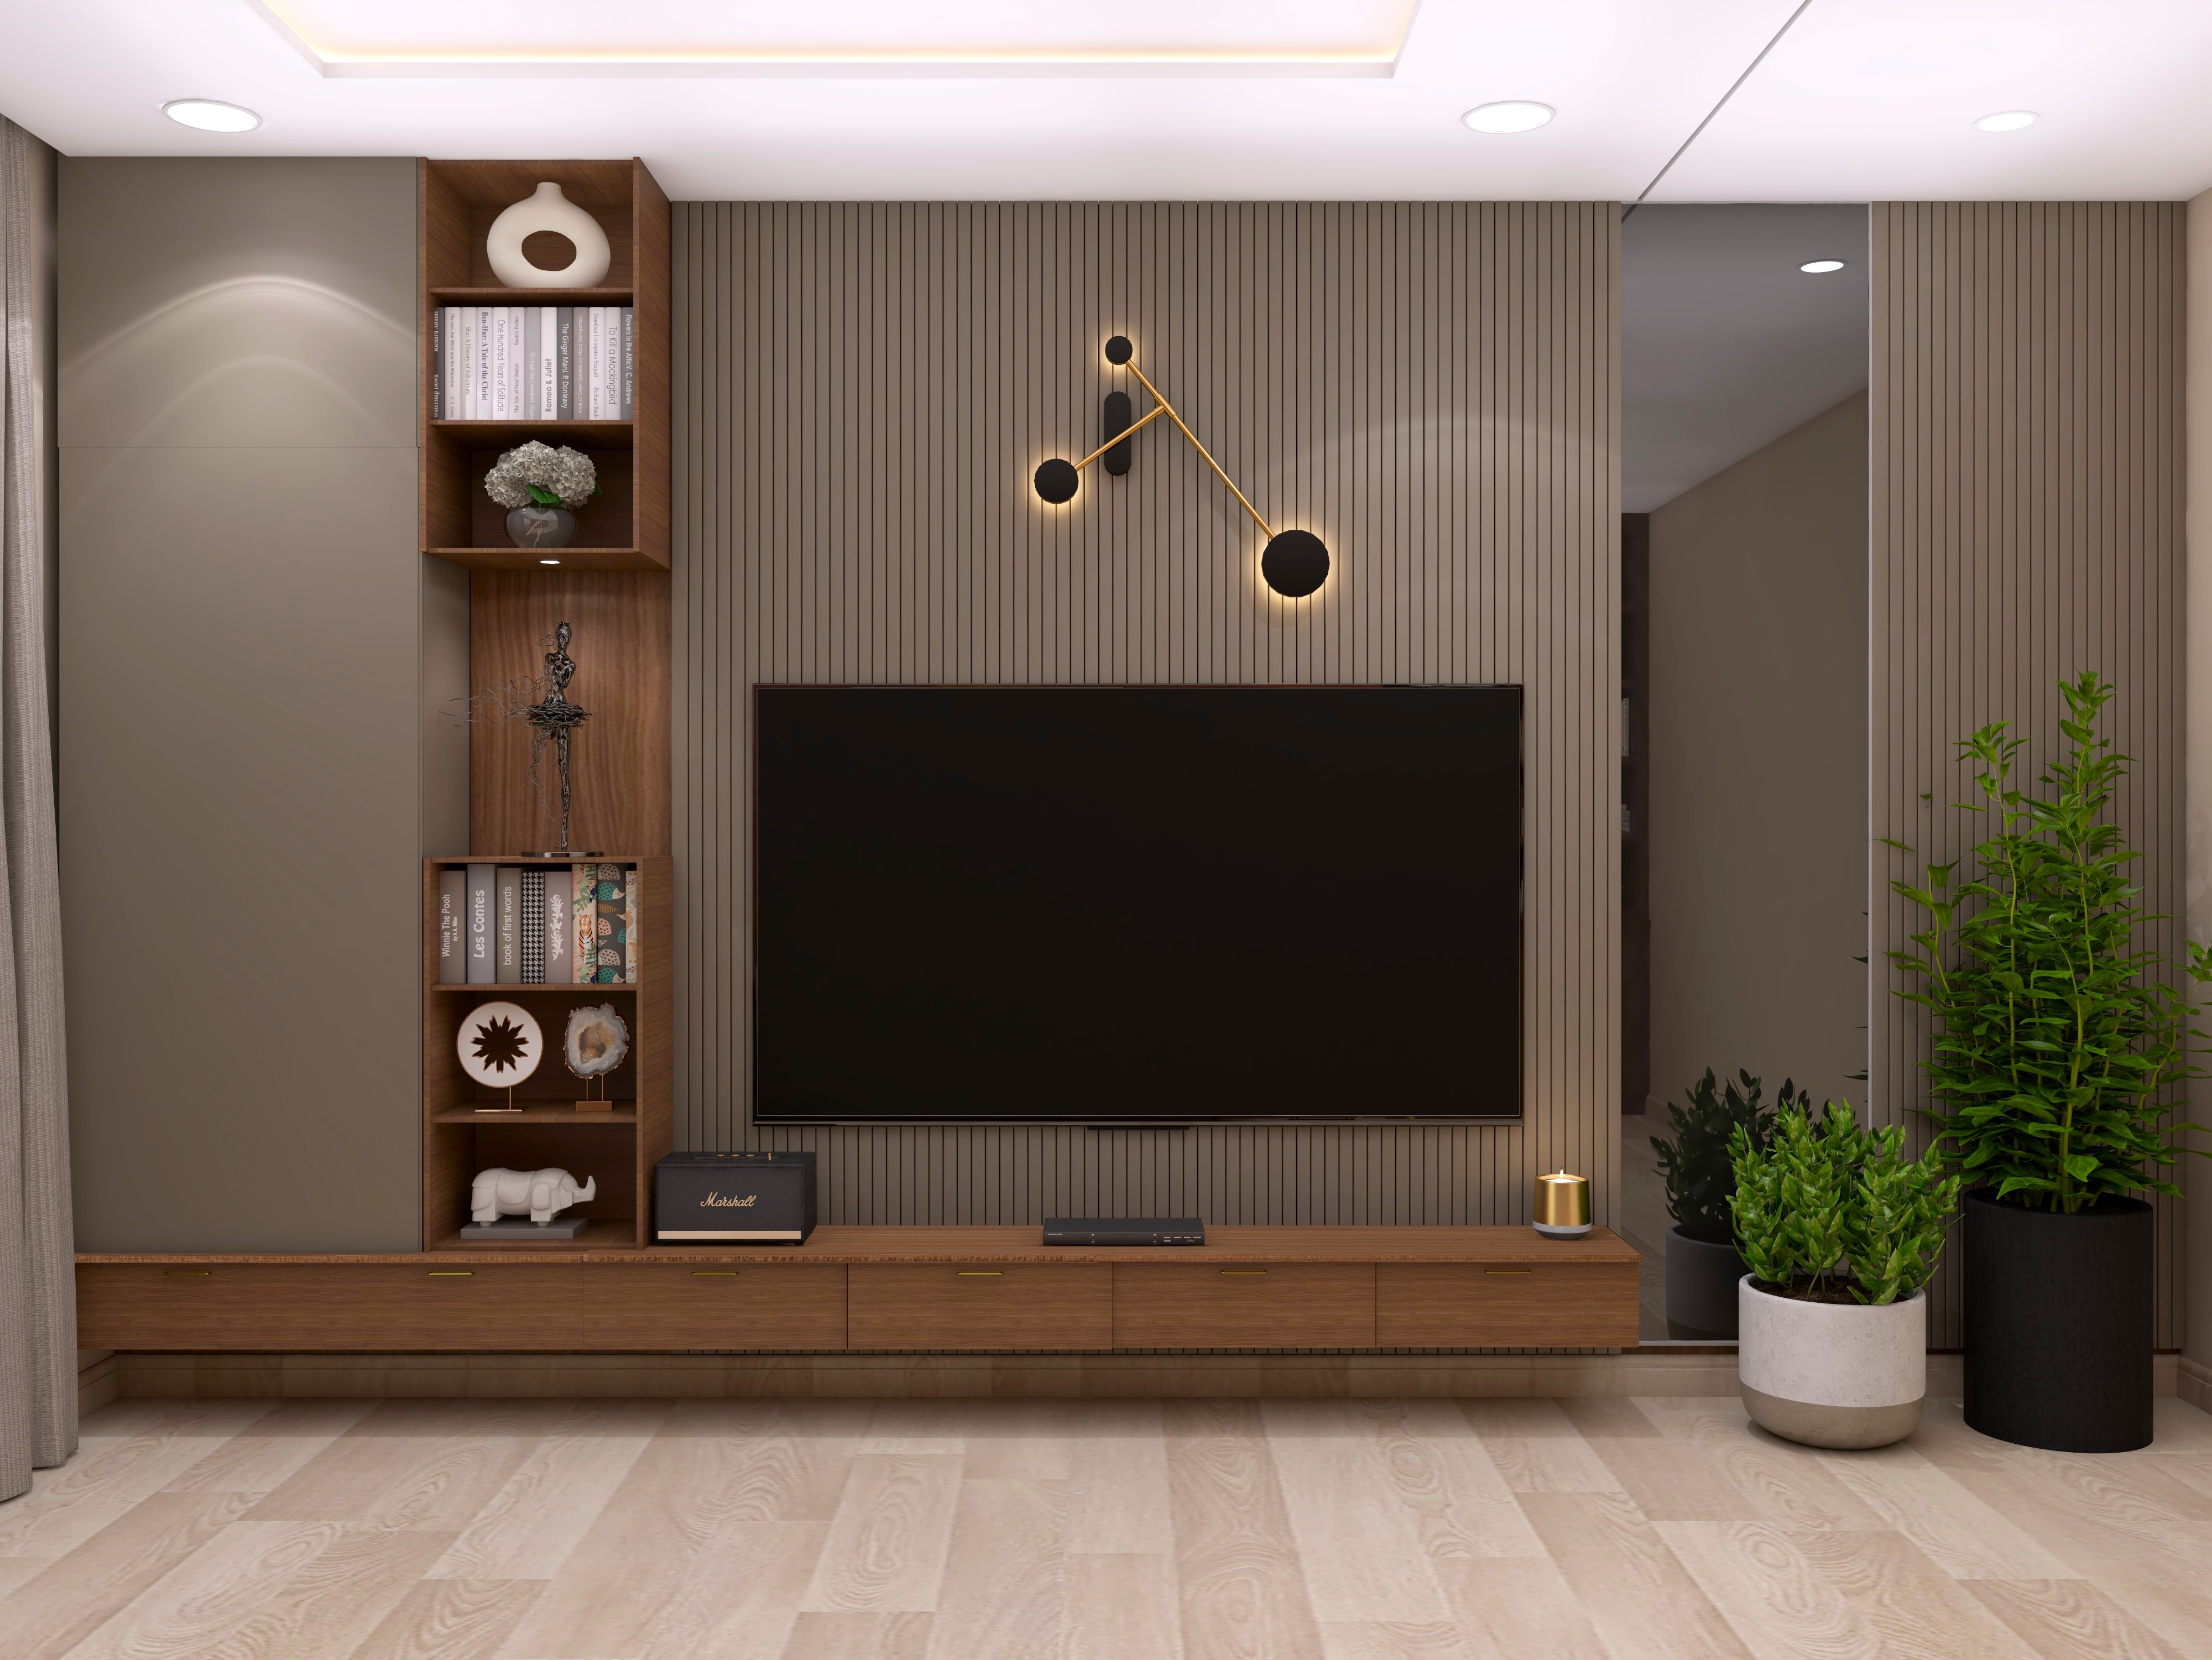 Modern TV unit with deep brown fluted paneling and shelf unit - Beautiful Homes